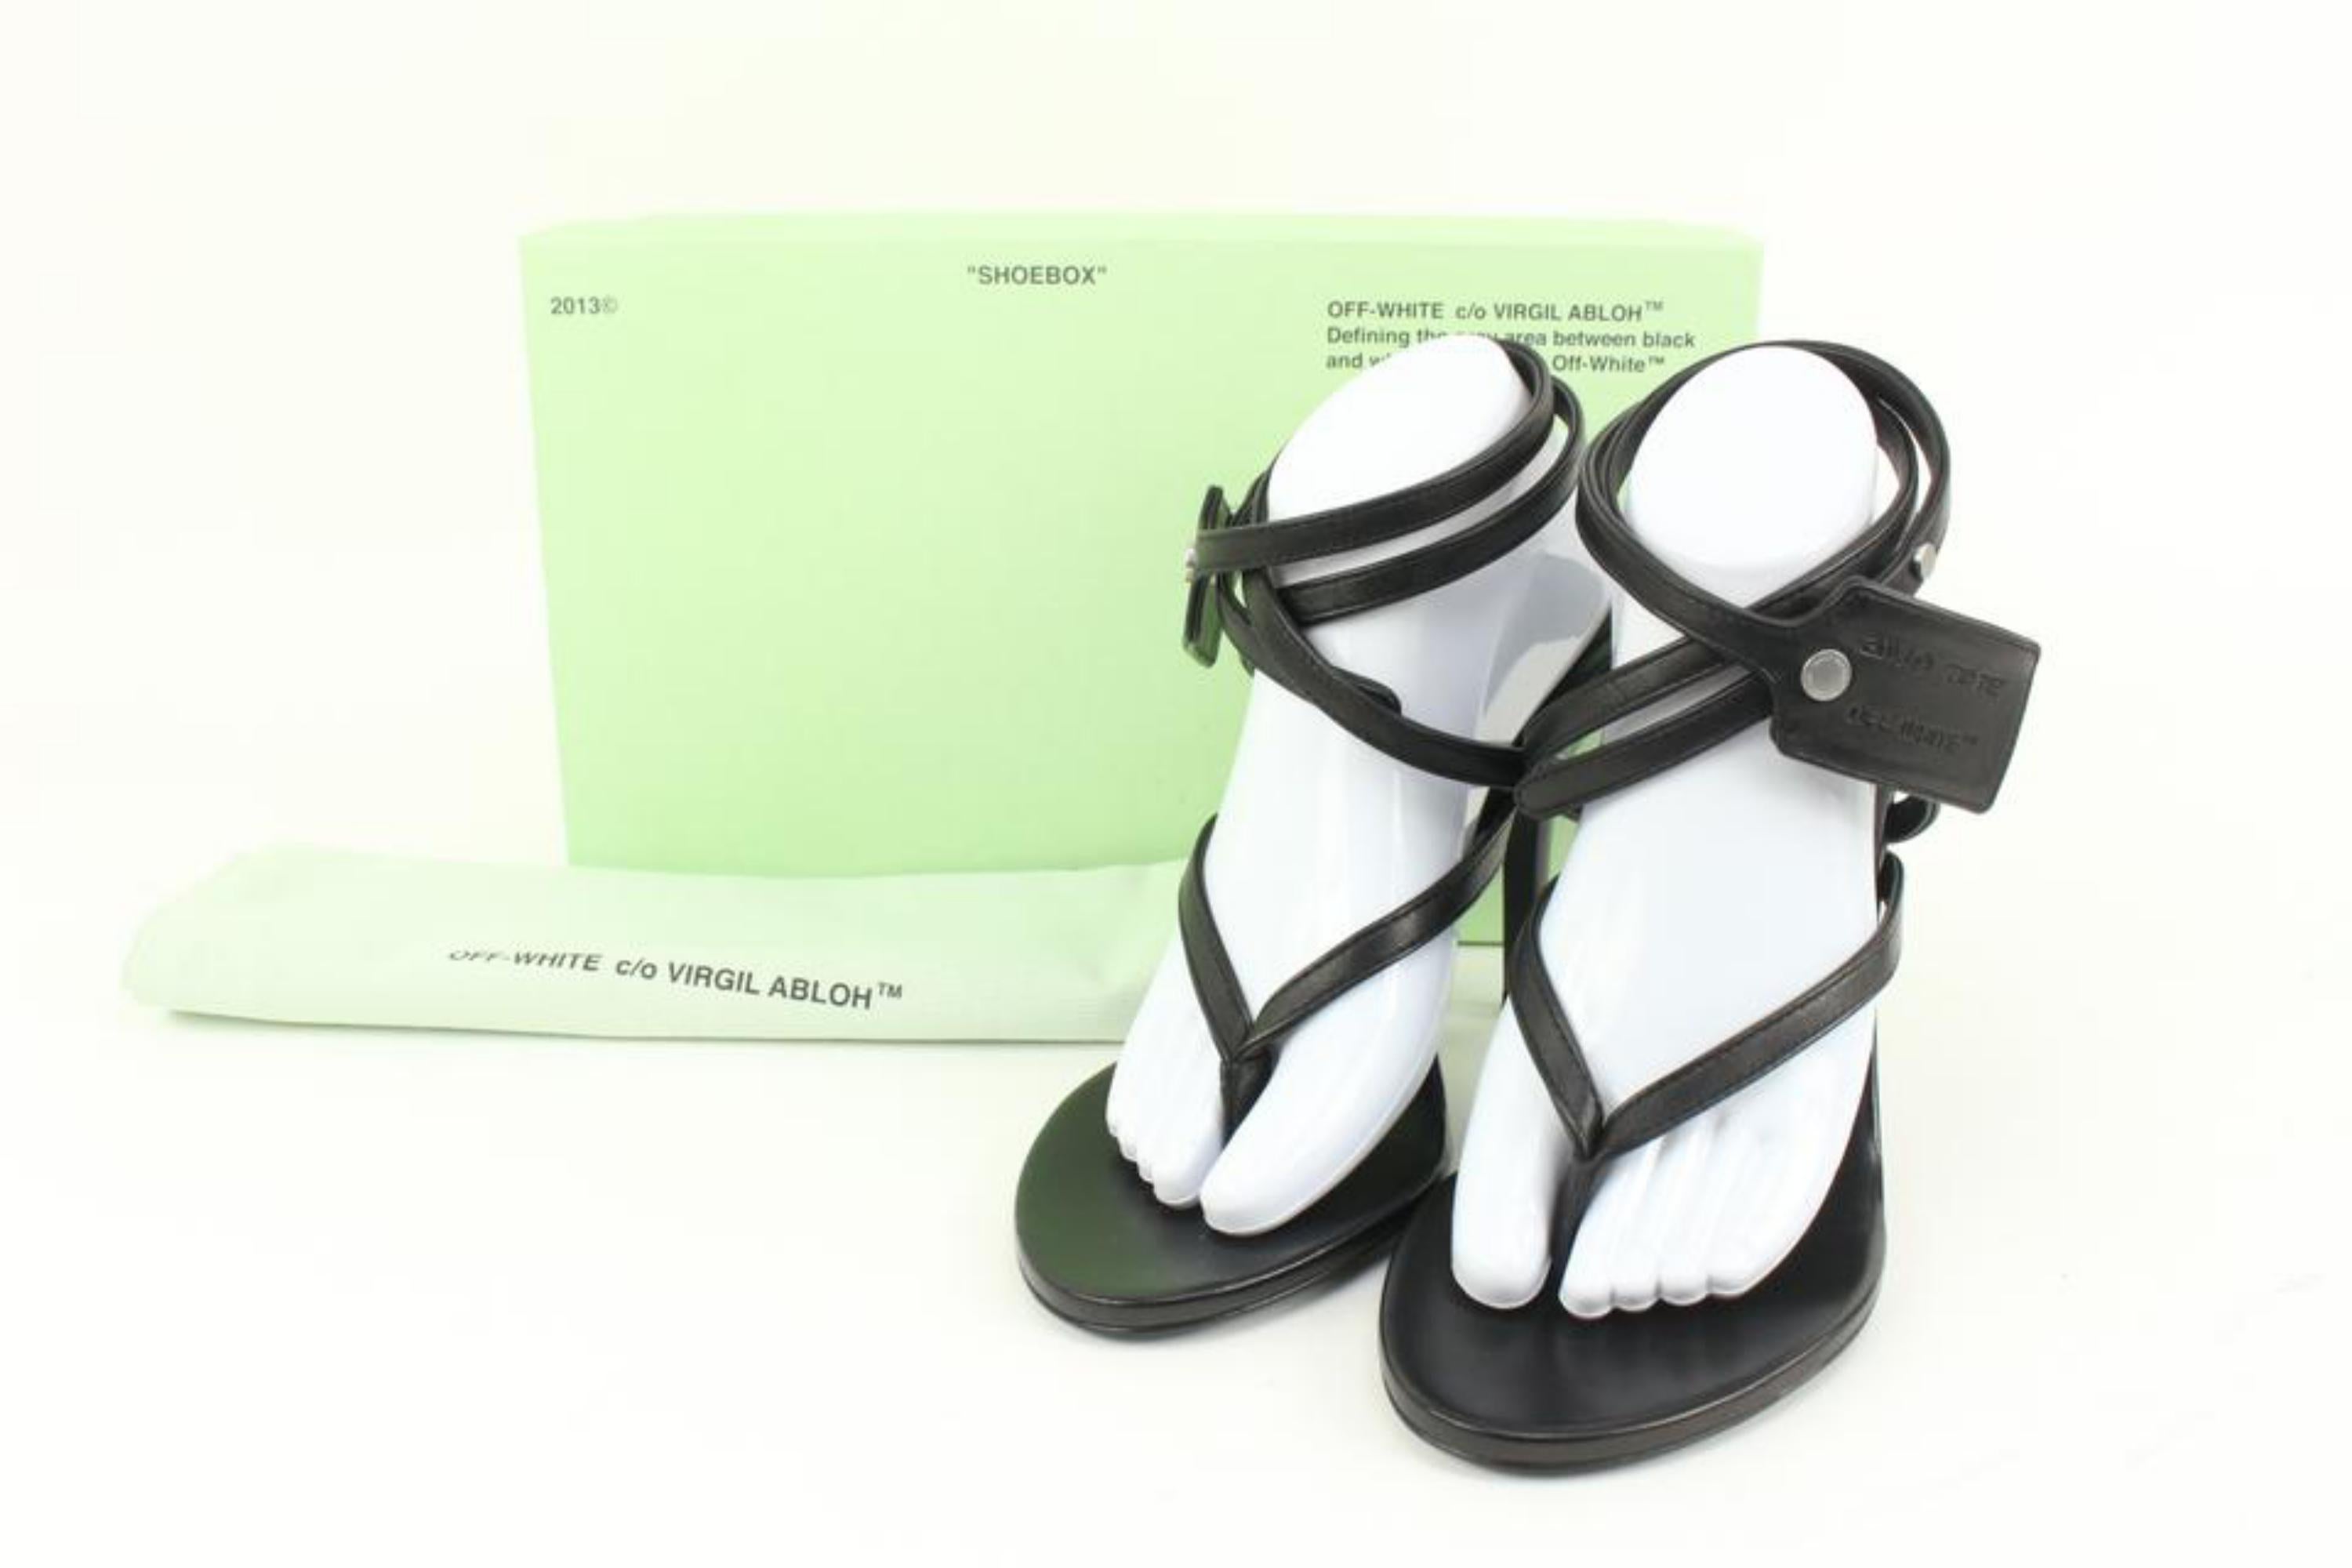 Off-White™ Size 41 Black Leather Zip Tie Sandal Heels 3of323s
Made In: Italy
Measurements: Length:  10.2